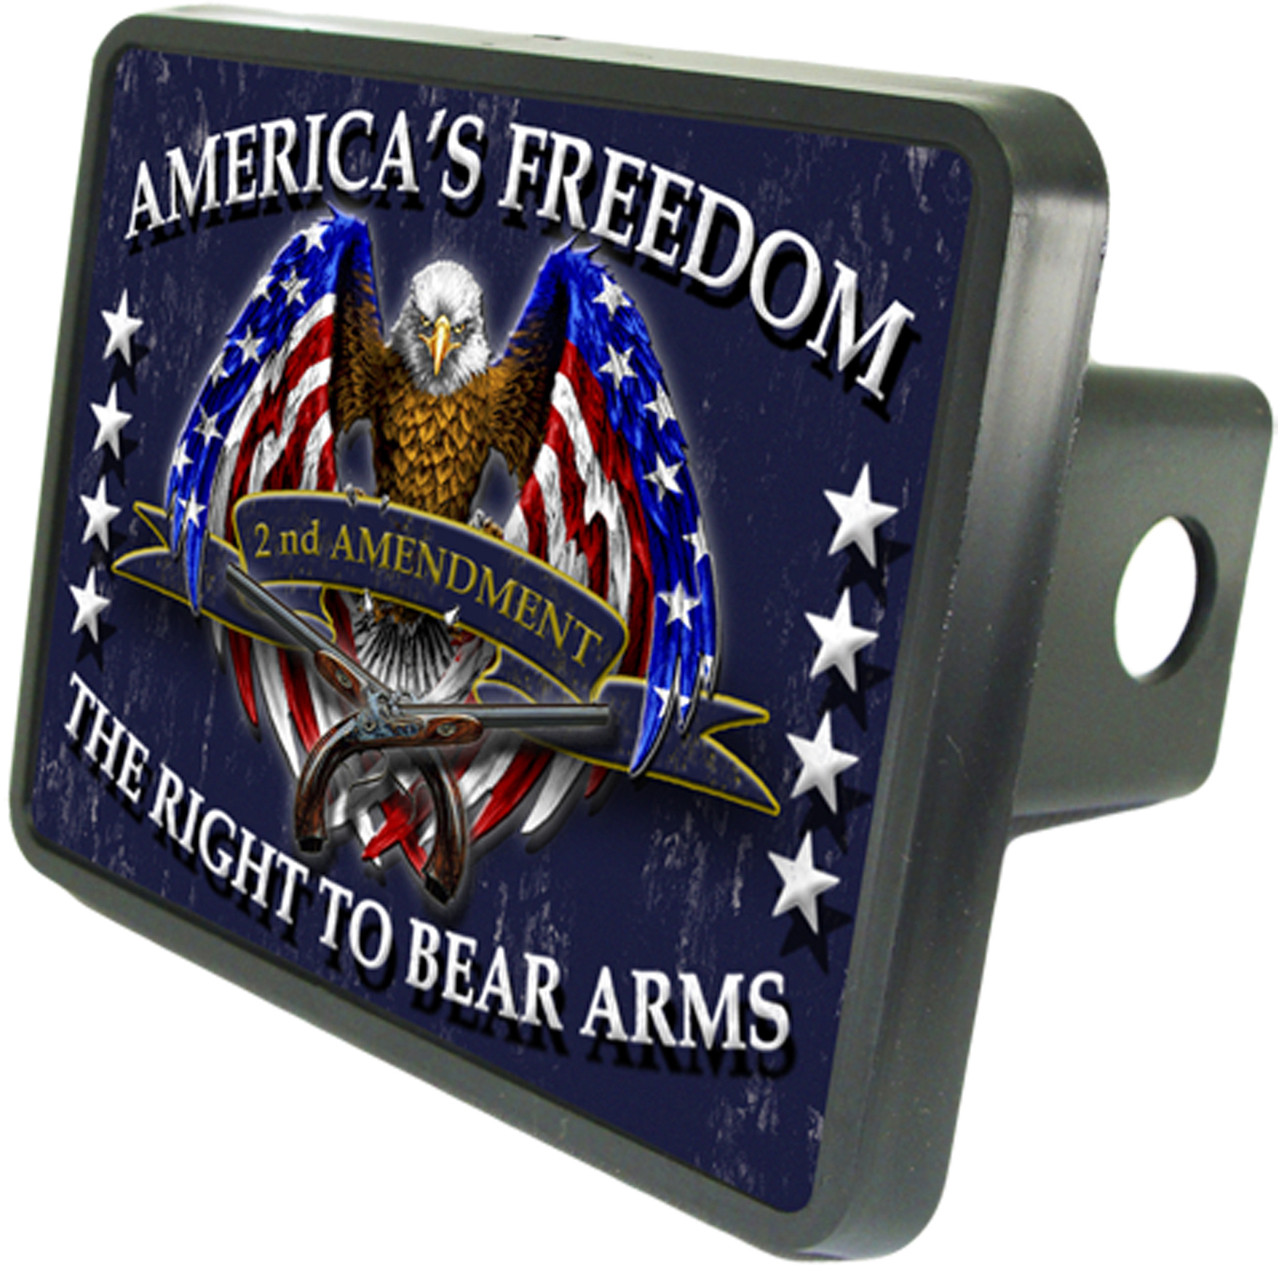 Graphics and More Guns Weapons Rifles Celebrate Diversity Second 2nd Amendment Tow Trailer Hitch Cover Plug Insert 1 1/4 inch 1.25 